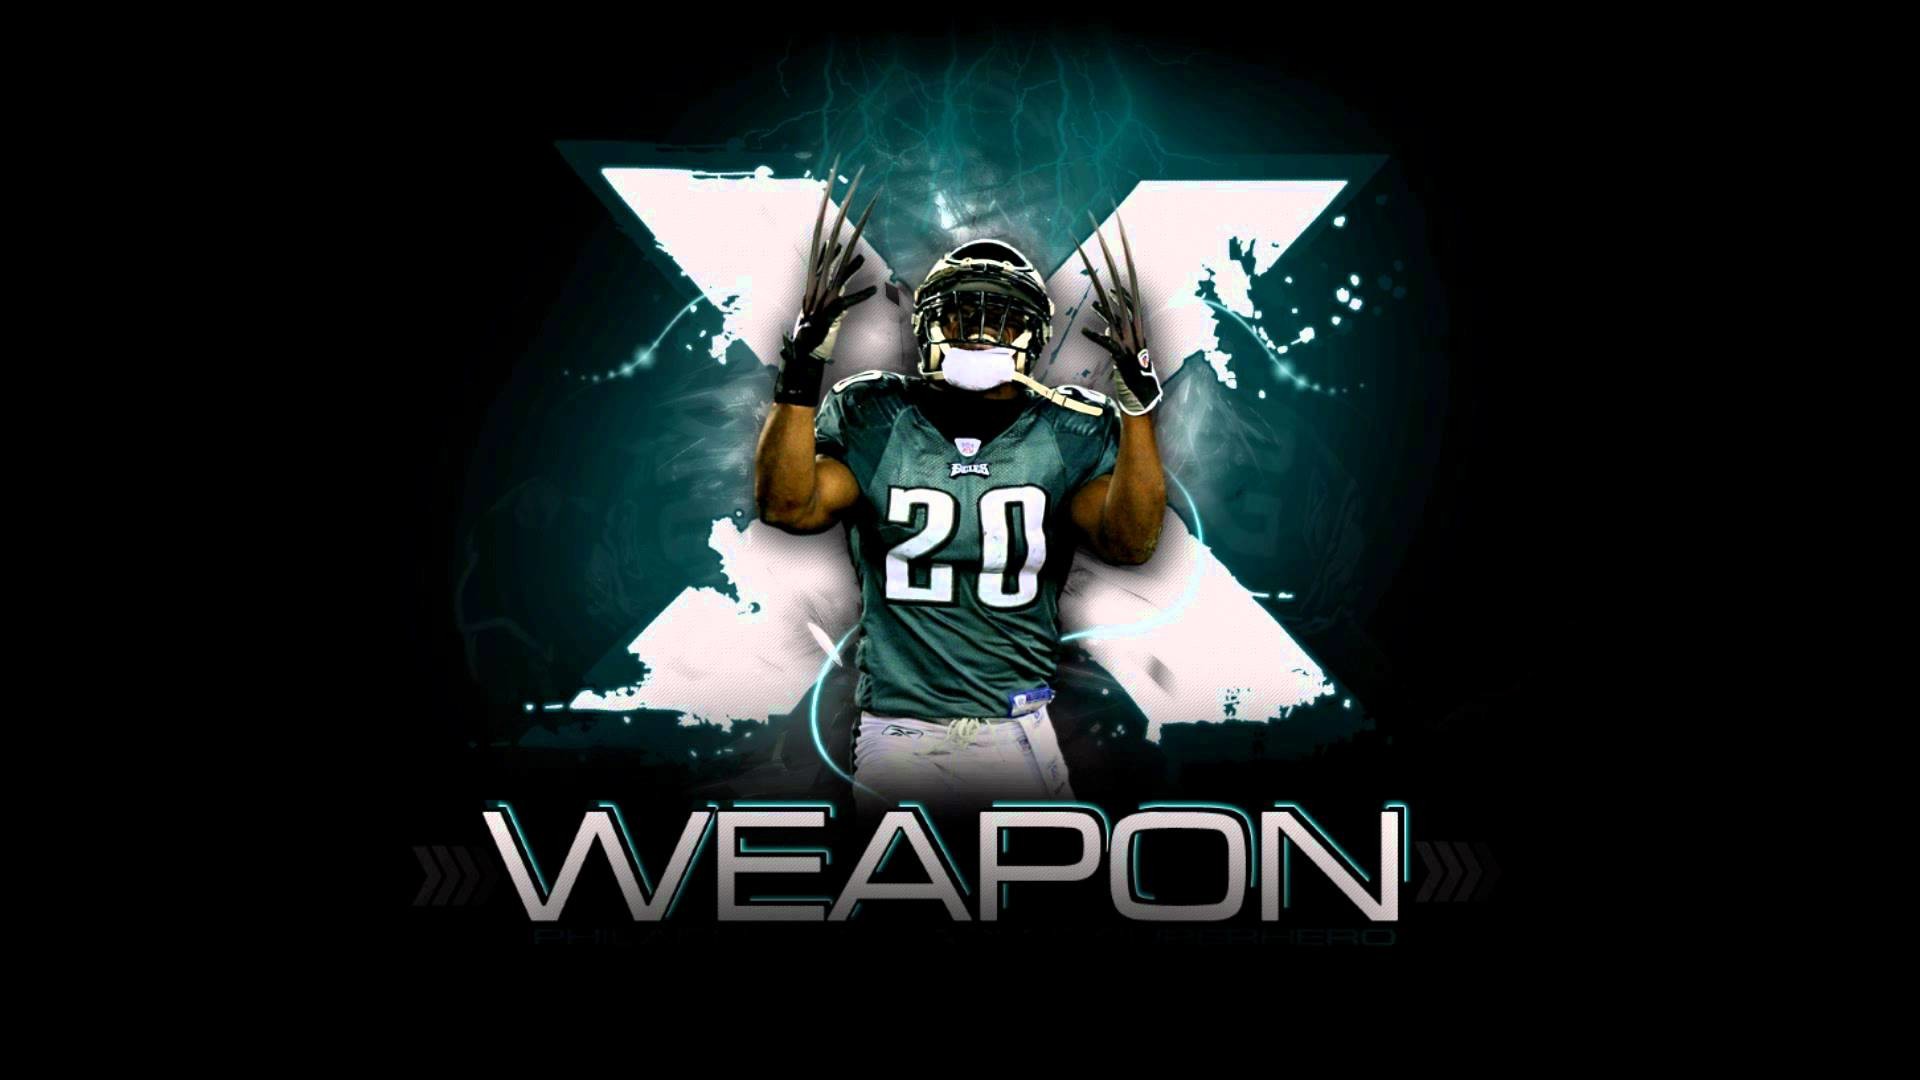 1920x1080 17 Best images about Philadelphia Eagles Brian Dawkins on